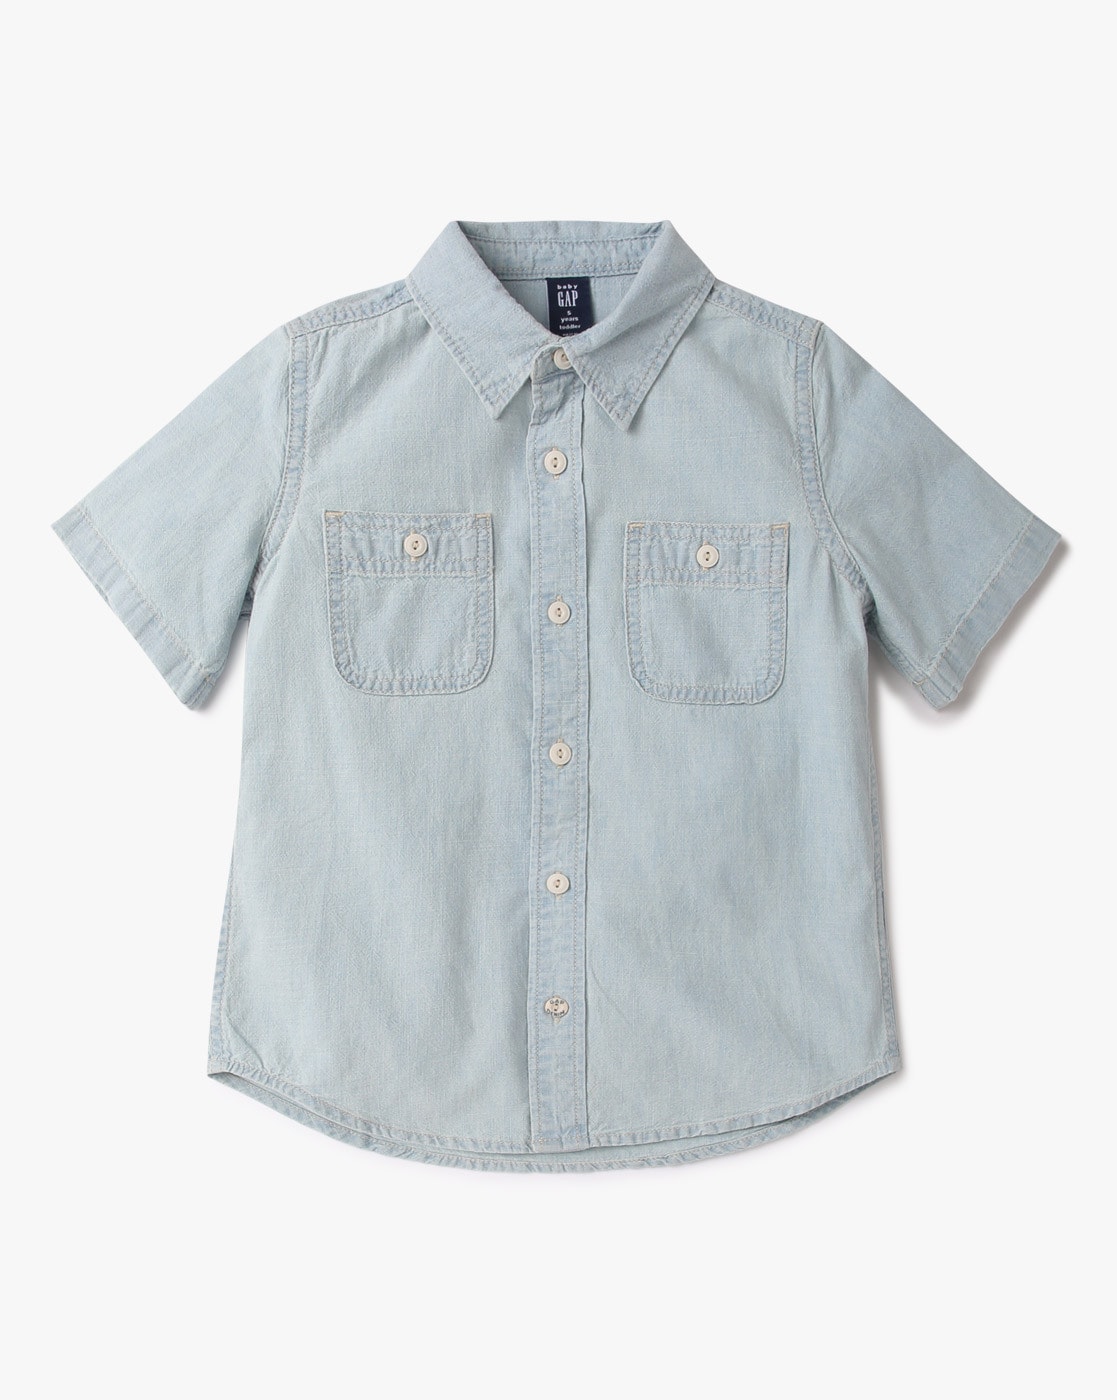 Short sleeve chambray button down | Primary.com